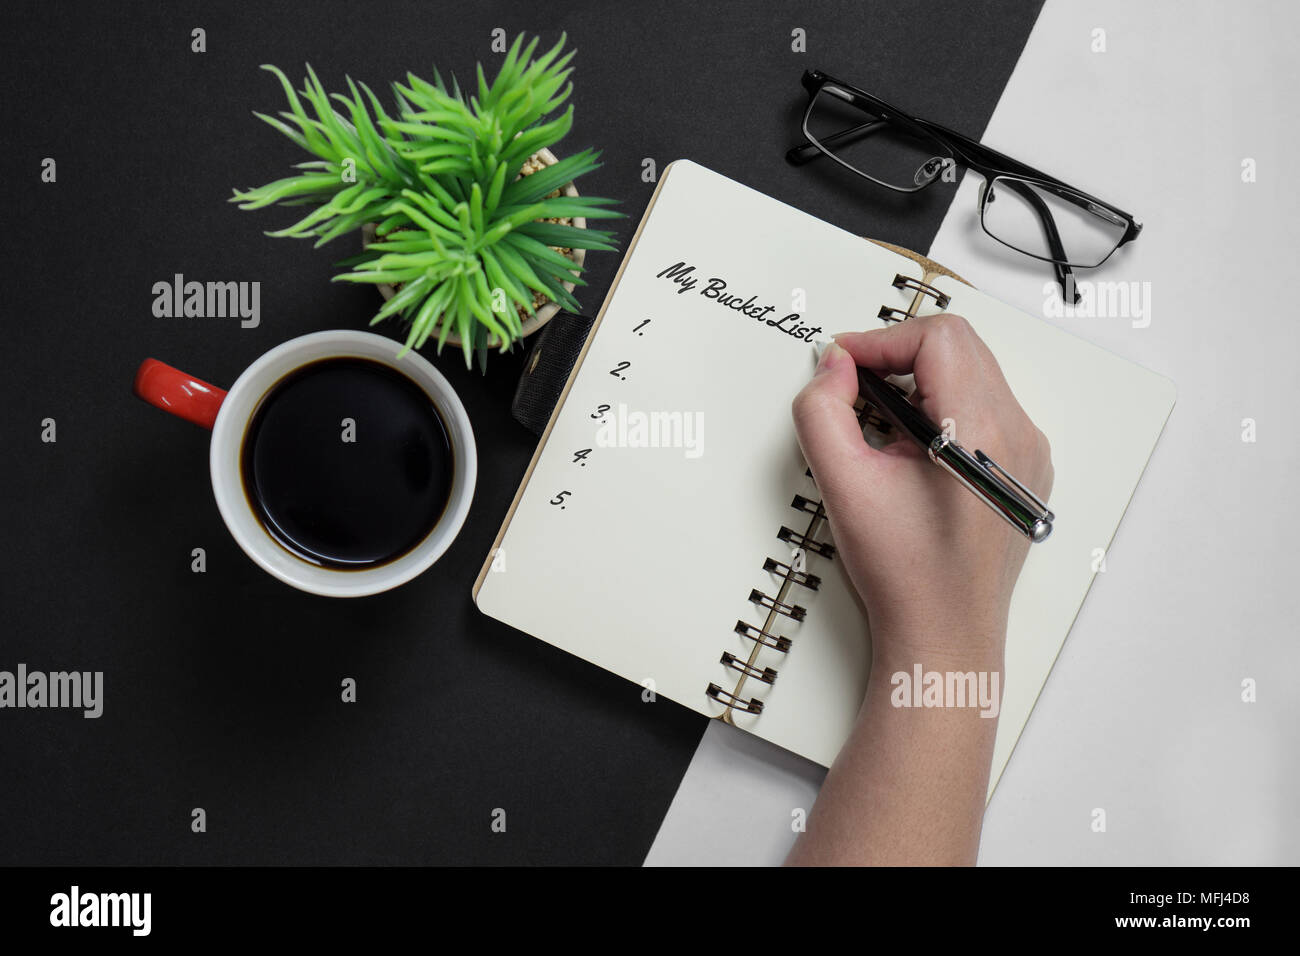 My bucket list. Hand writing on notebook with coffee mug, potted plant and spectacle. Stock Photo